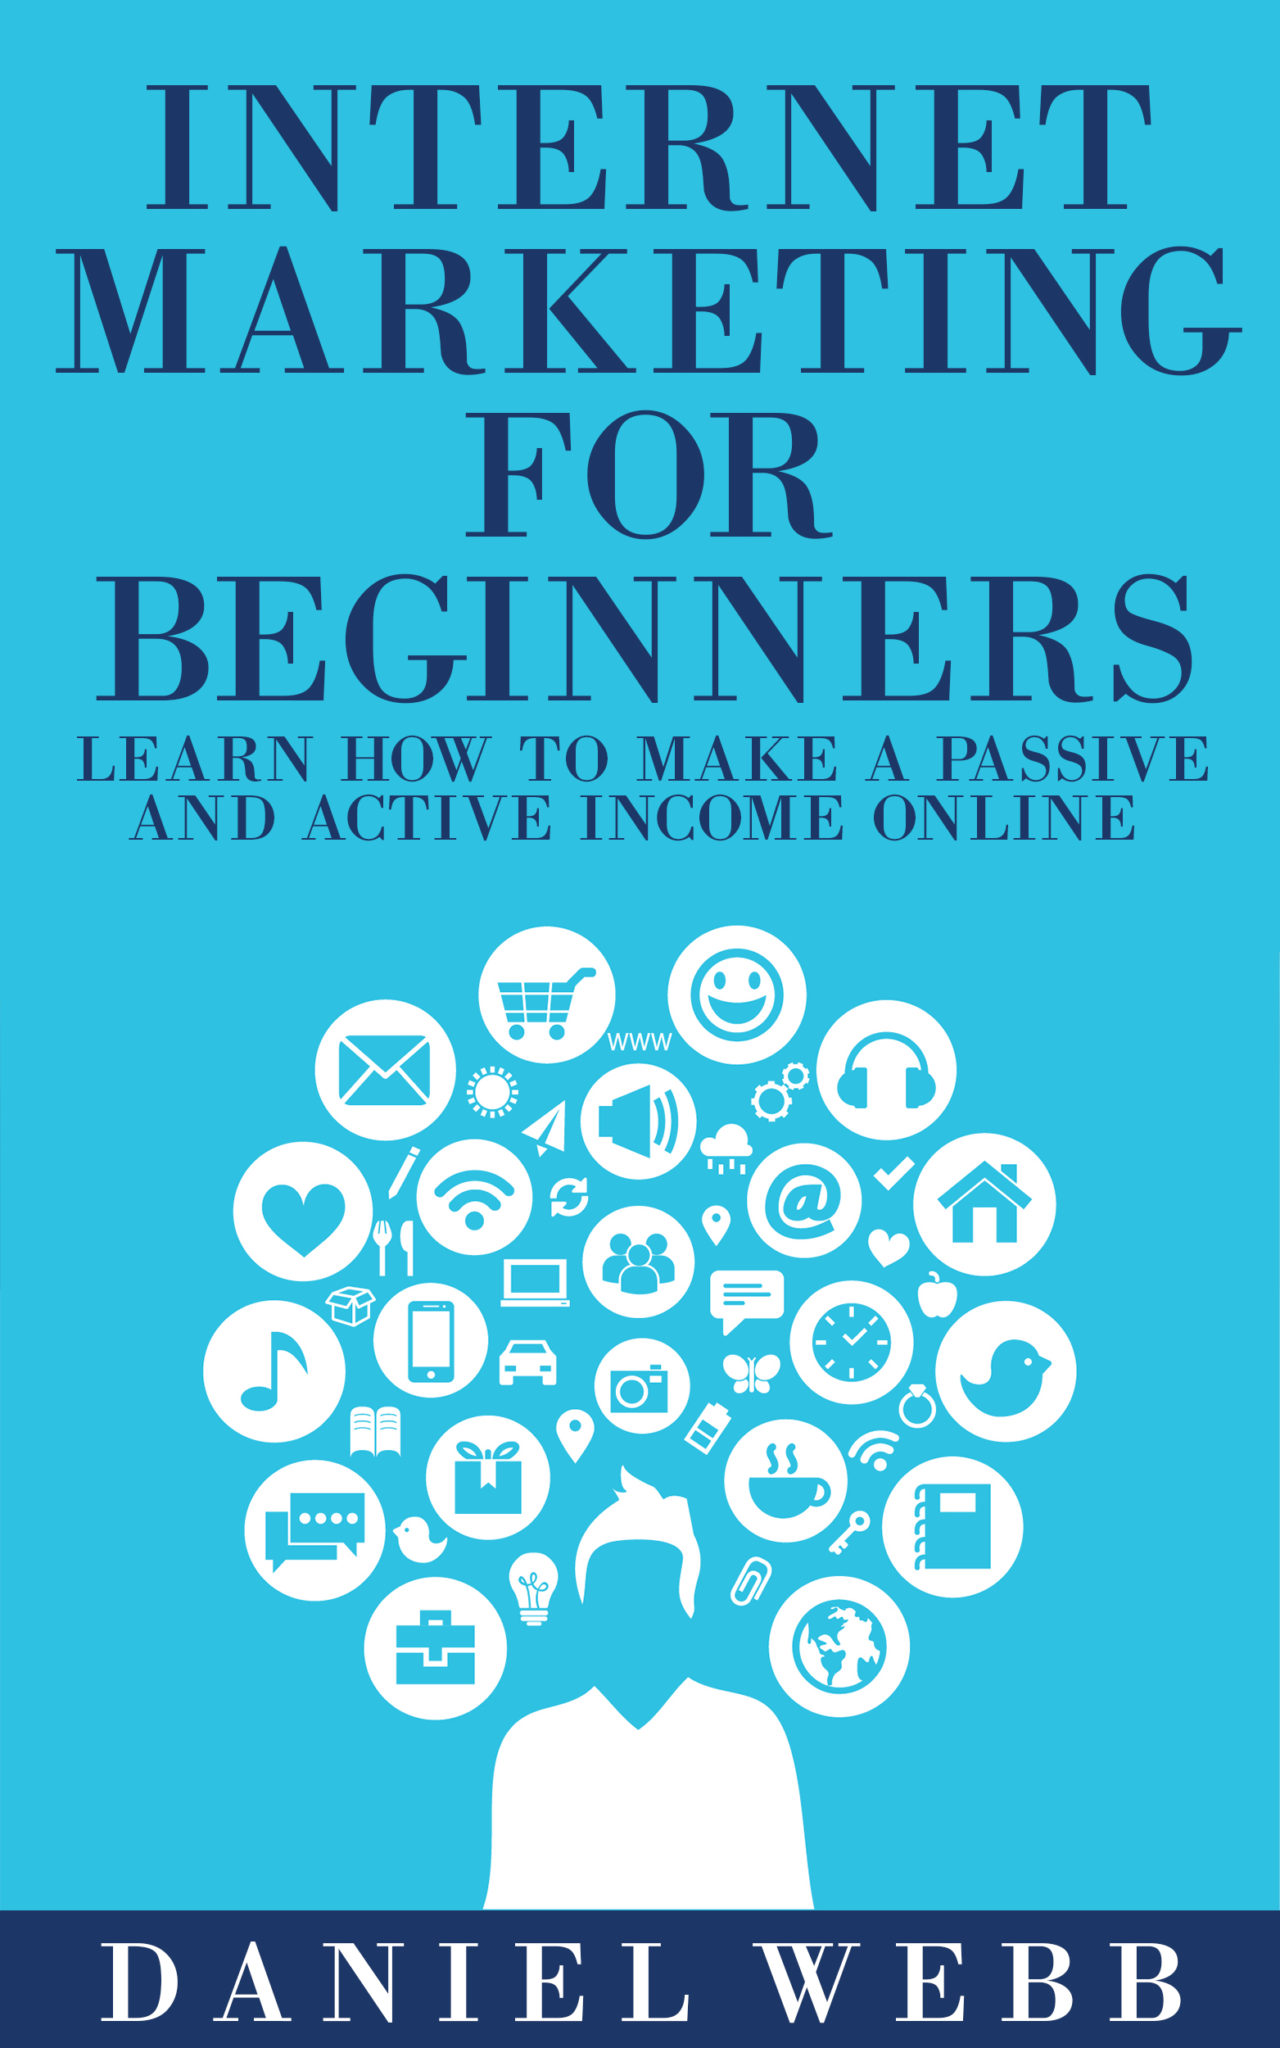 Internet Marketing For Beginners – Learn How To Make A Passive And Active Income Online( Internet marketing for beginners, Make Money Online, Digital nomad) by Daniel Webb